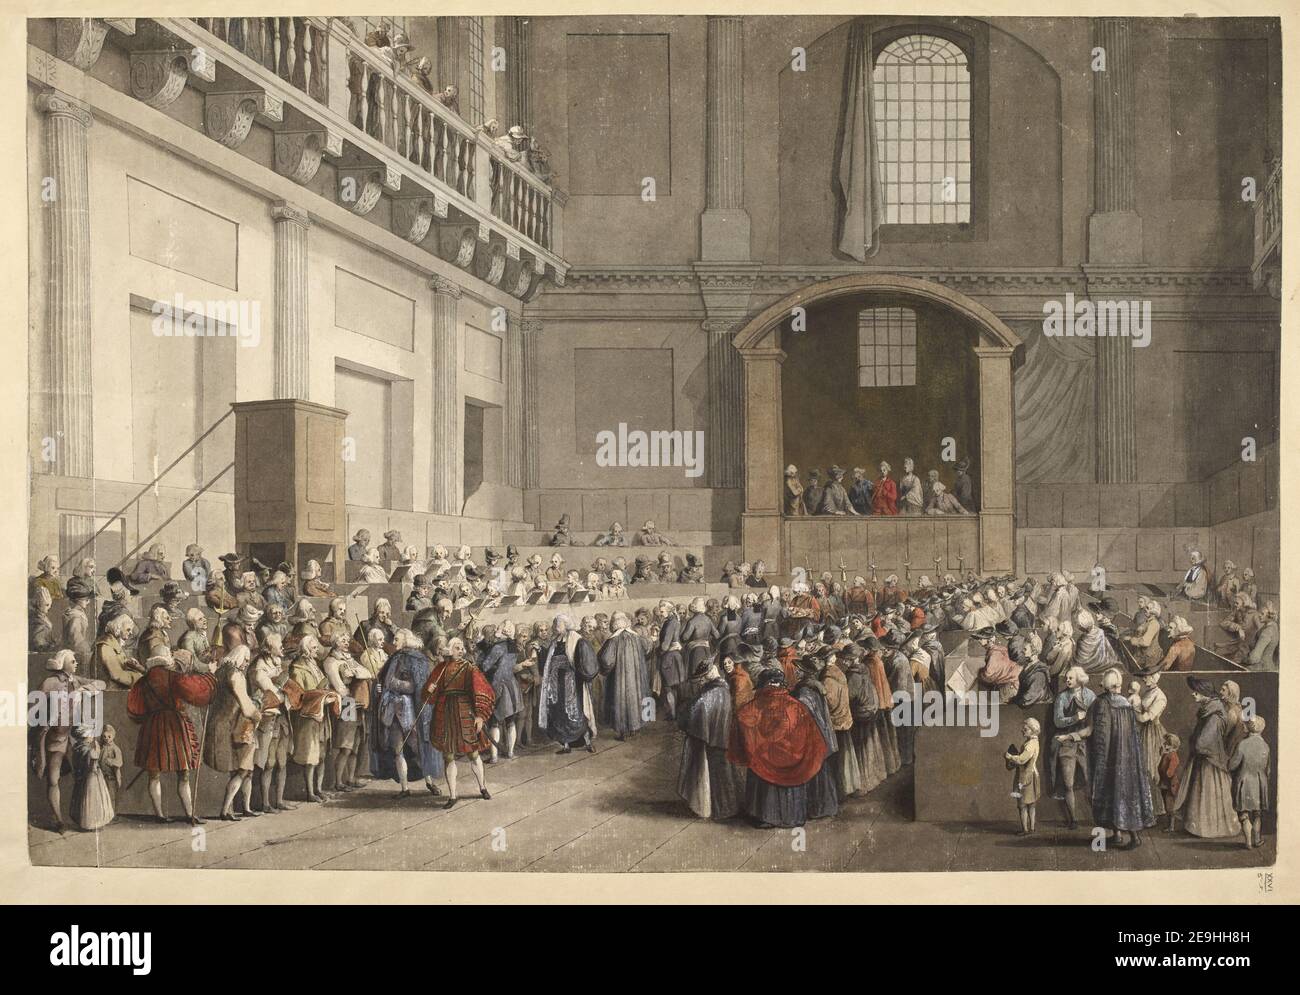 THE DISTRIBUTION OF HIS MAJESTY'S MAUNDY, BY THE SUB ALMONER in the Chapel Royal, at WHITEHALL   Author  Grimm, Samuel Hieronymus 26.5.r. Date of publication: 1773.  Item type: 1 drawing Medium: pen and ink with watercolour heightened with gum arabic Dimensions: sheet 42 x 61.9 cm  Former owner: George III, King of Great Britain, 1738-1820 Stock Photo